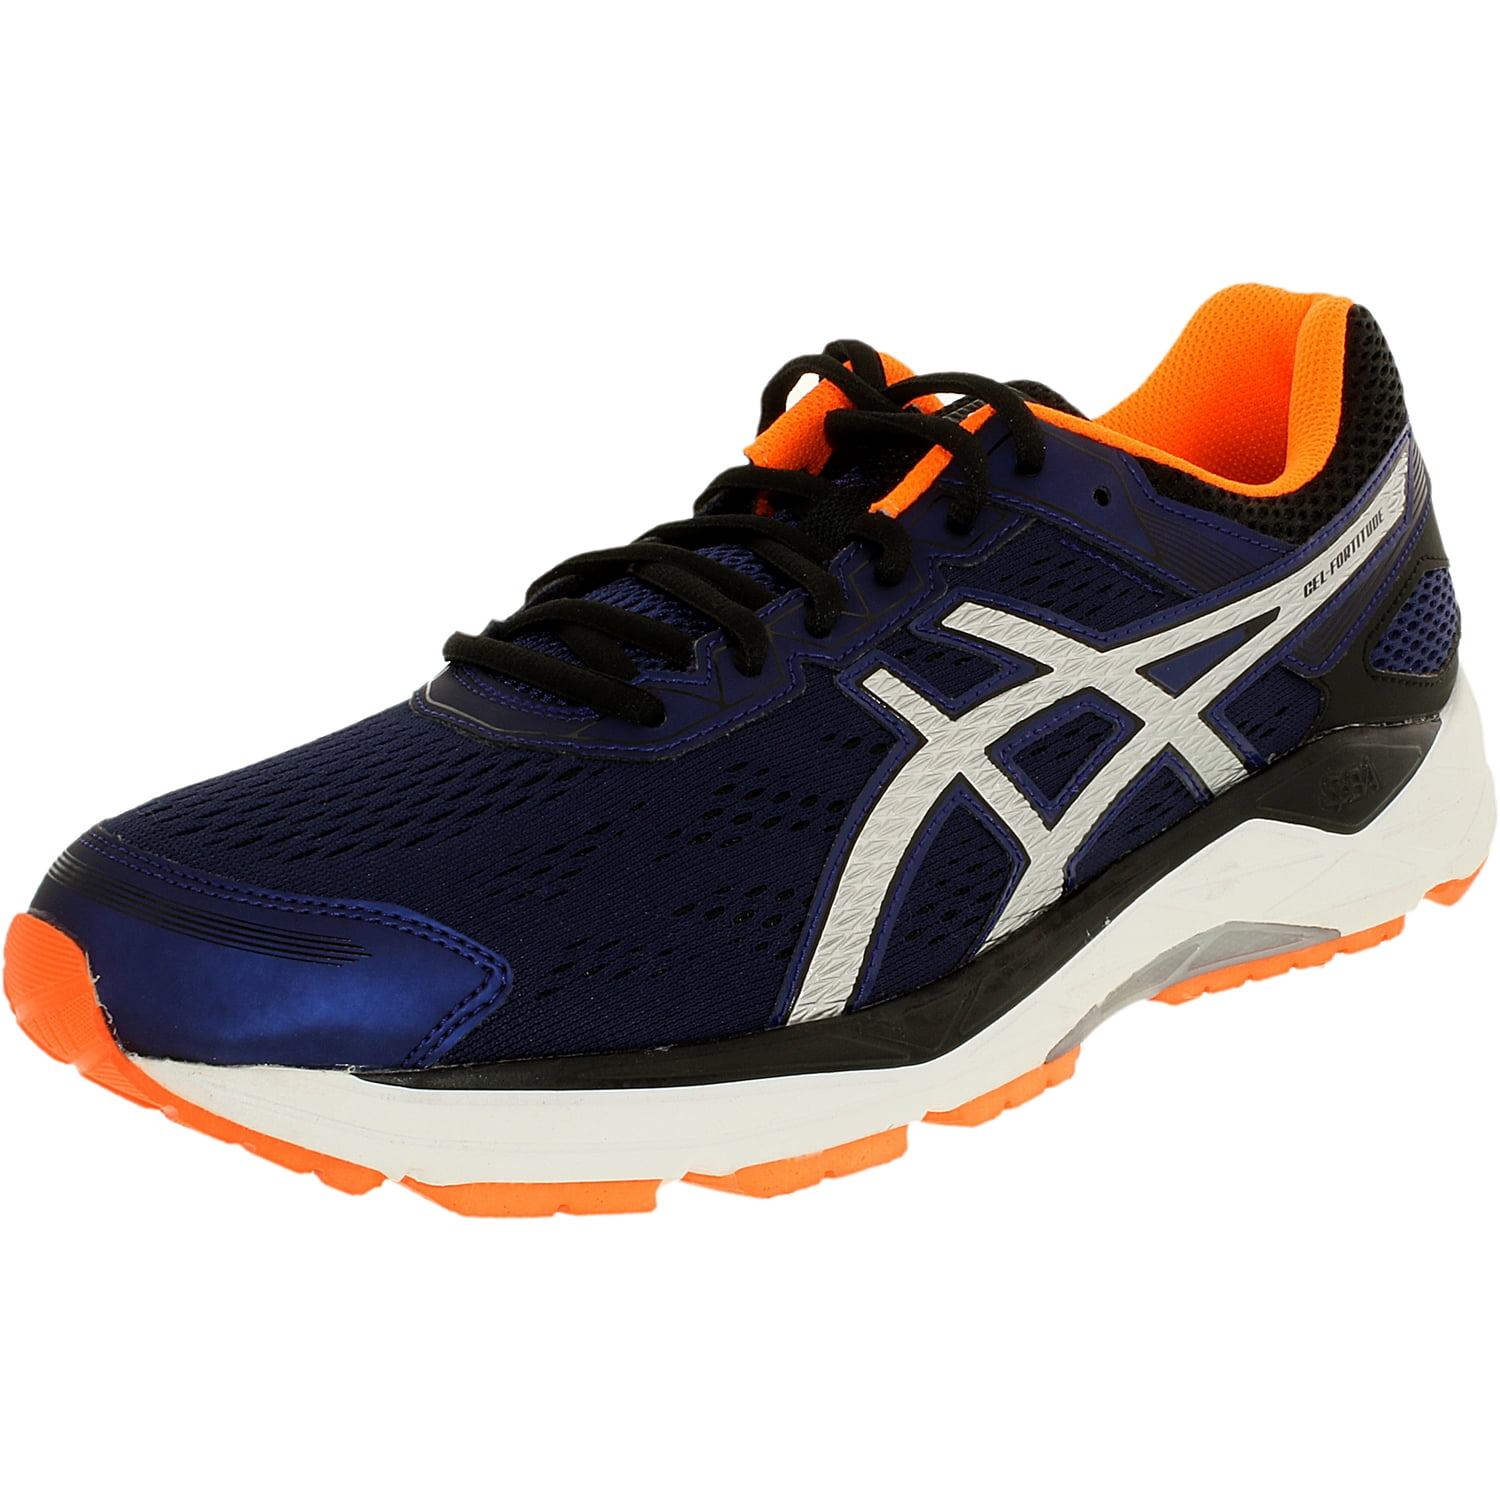 asics gel fortitude 7 running shoes